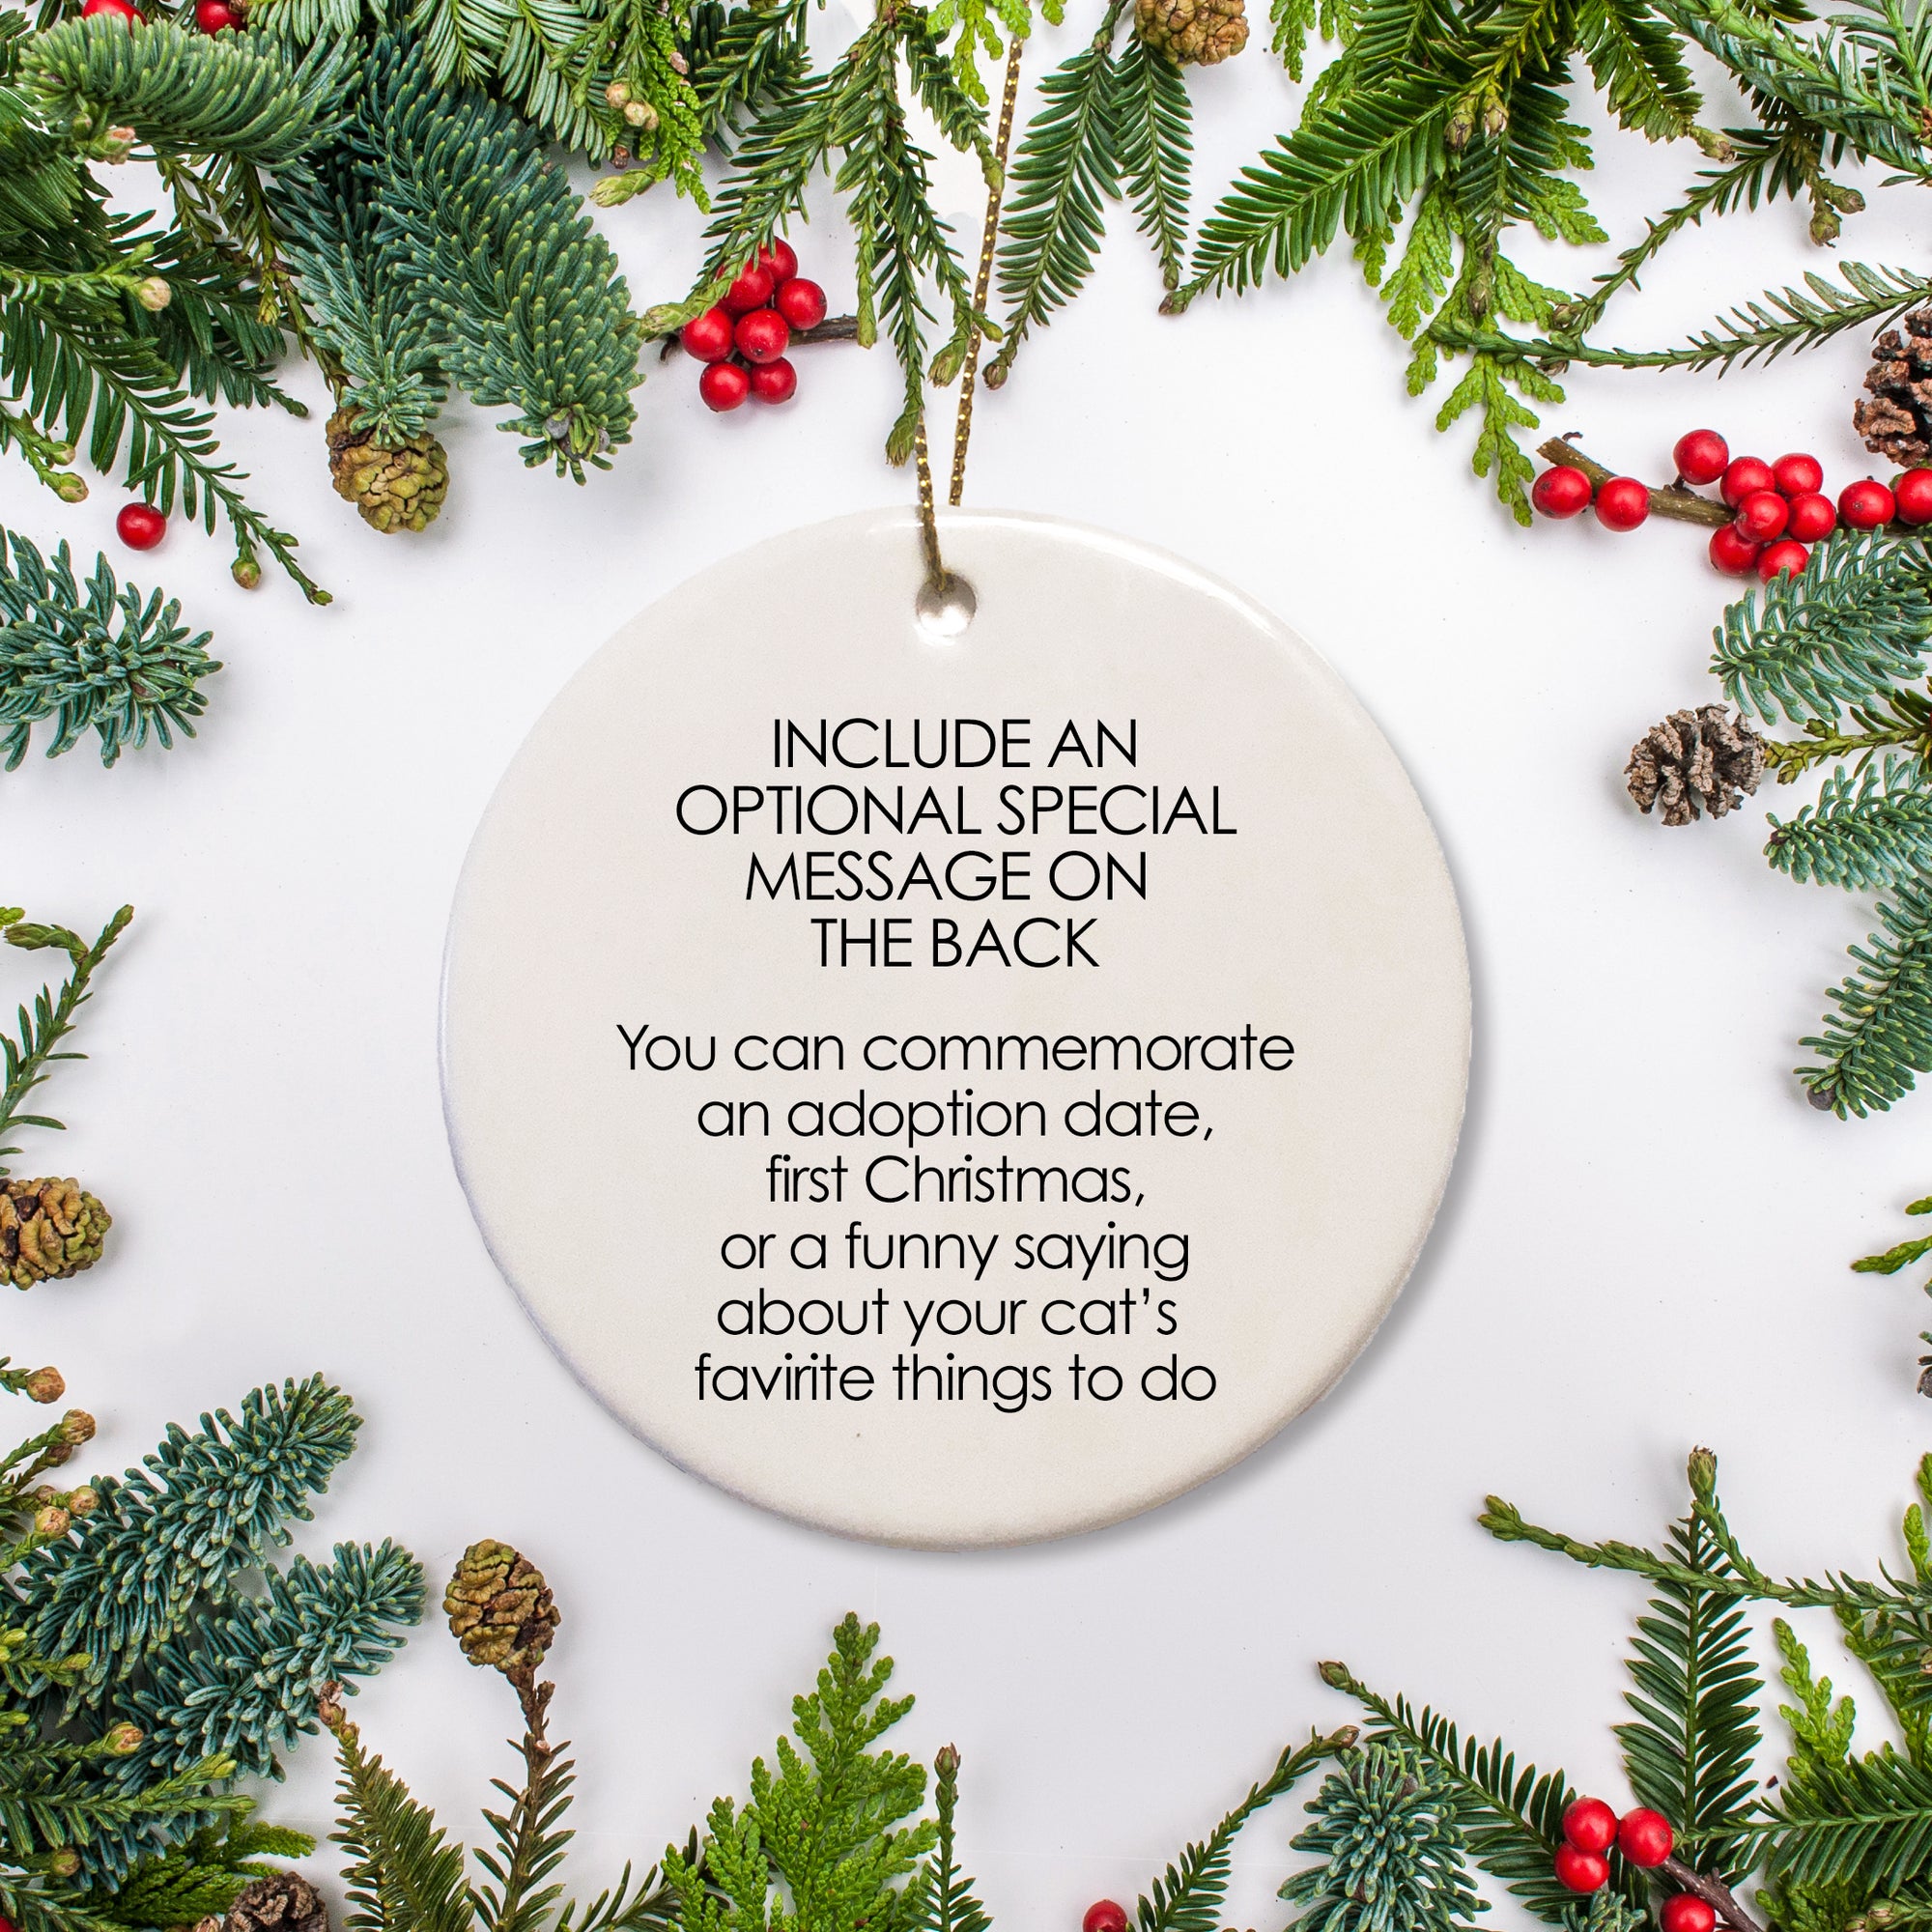 The back of the ornament provides the option for a special message.  It could be a memory, an adoption date, or whatever you choose.